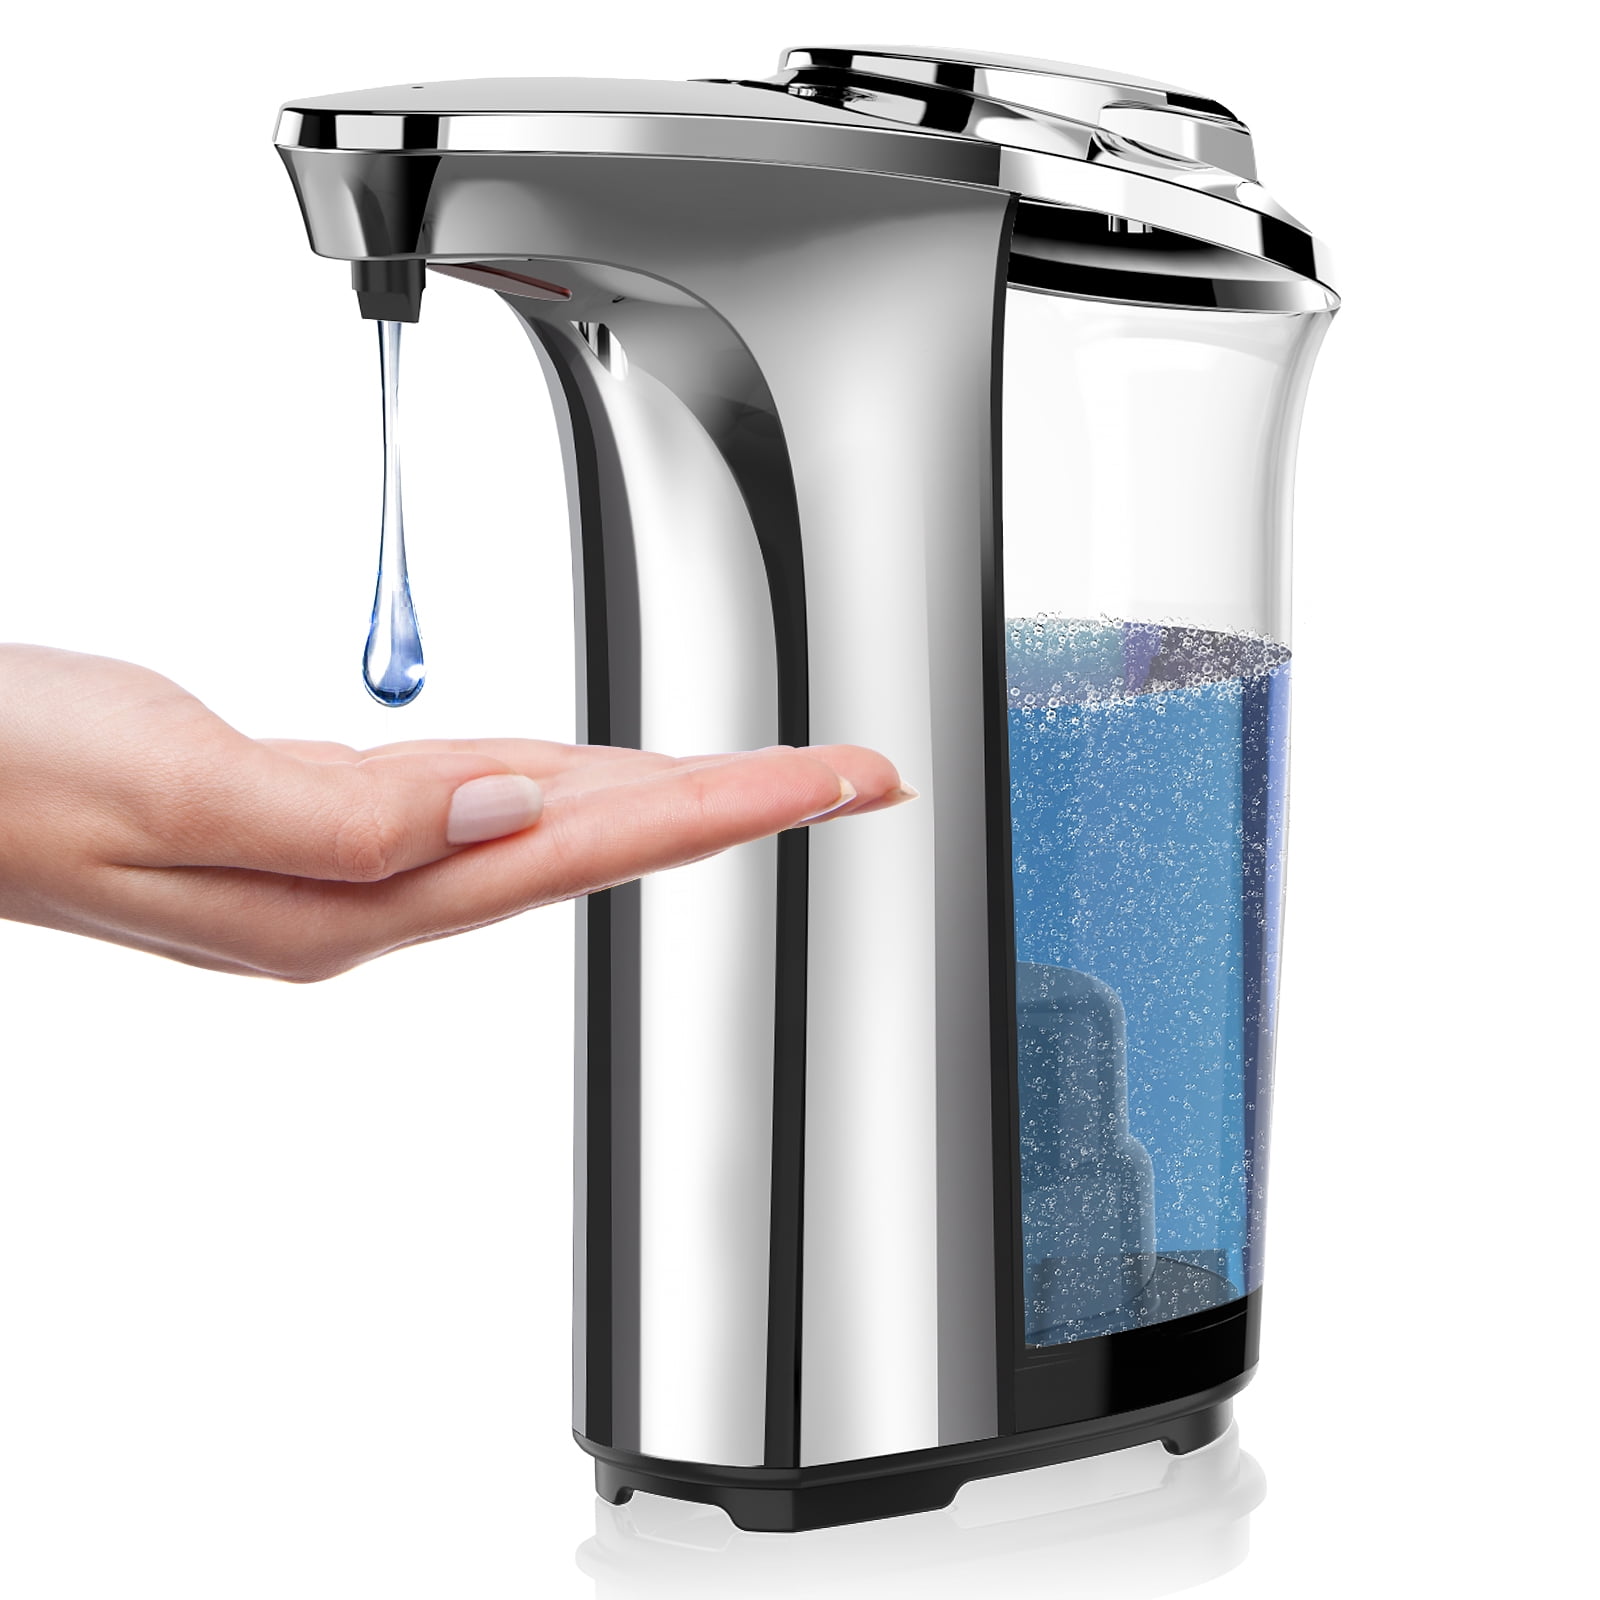 Vestaiot Automatic Stainless Steel Soap Dispenser，Touchless Automatic Soap Dispenser,with Waterproof Base,Suitable for Bathroom Kitchen Hotel Restaurant